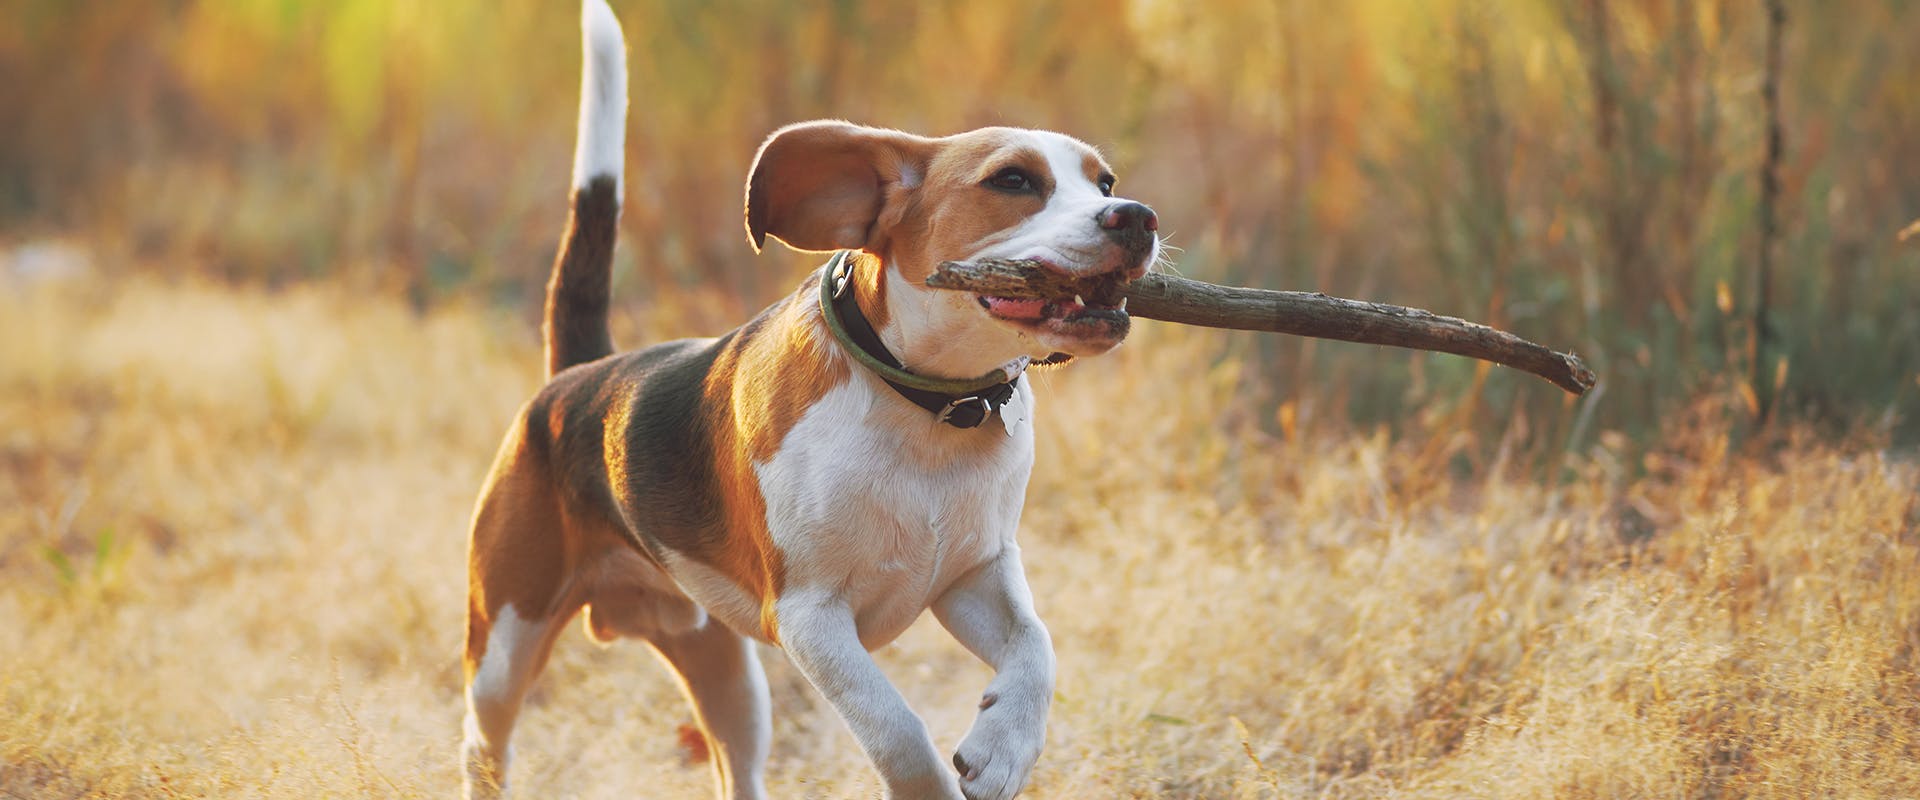 A Beagle dog running through a field with a large stick in his mouth